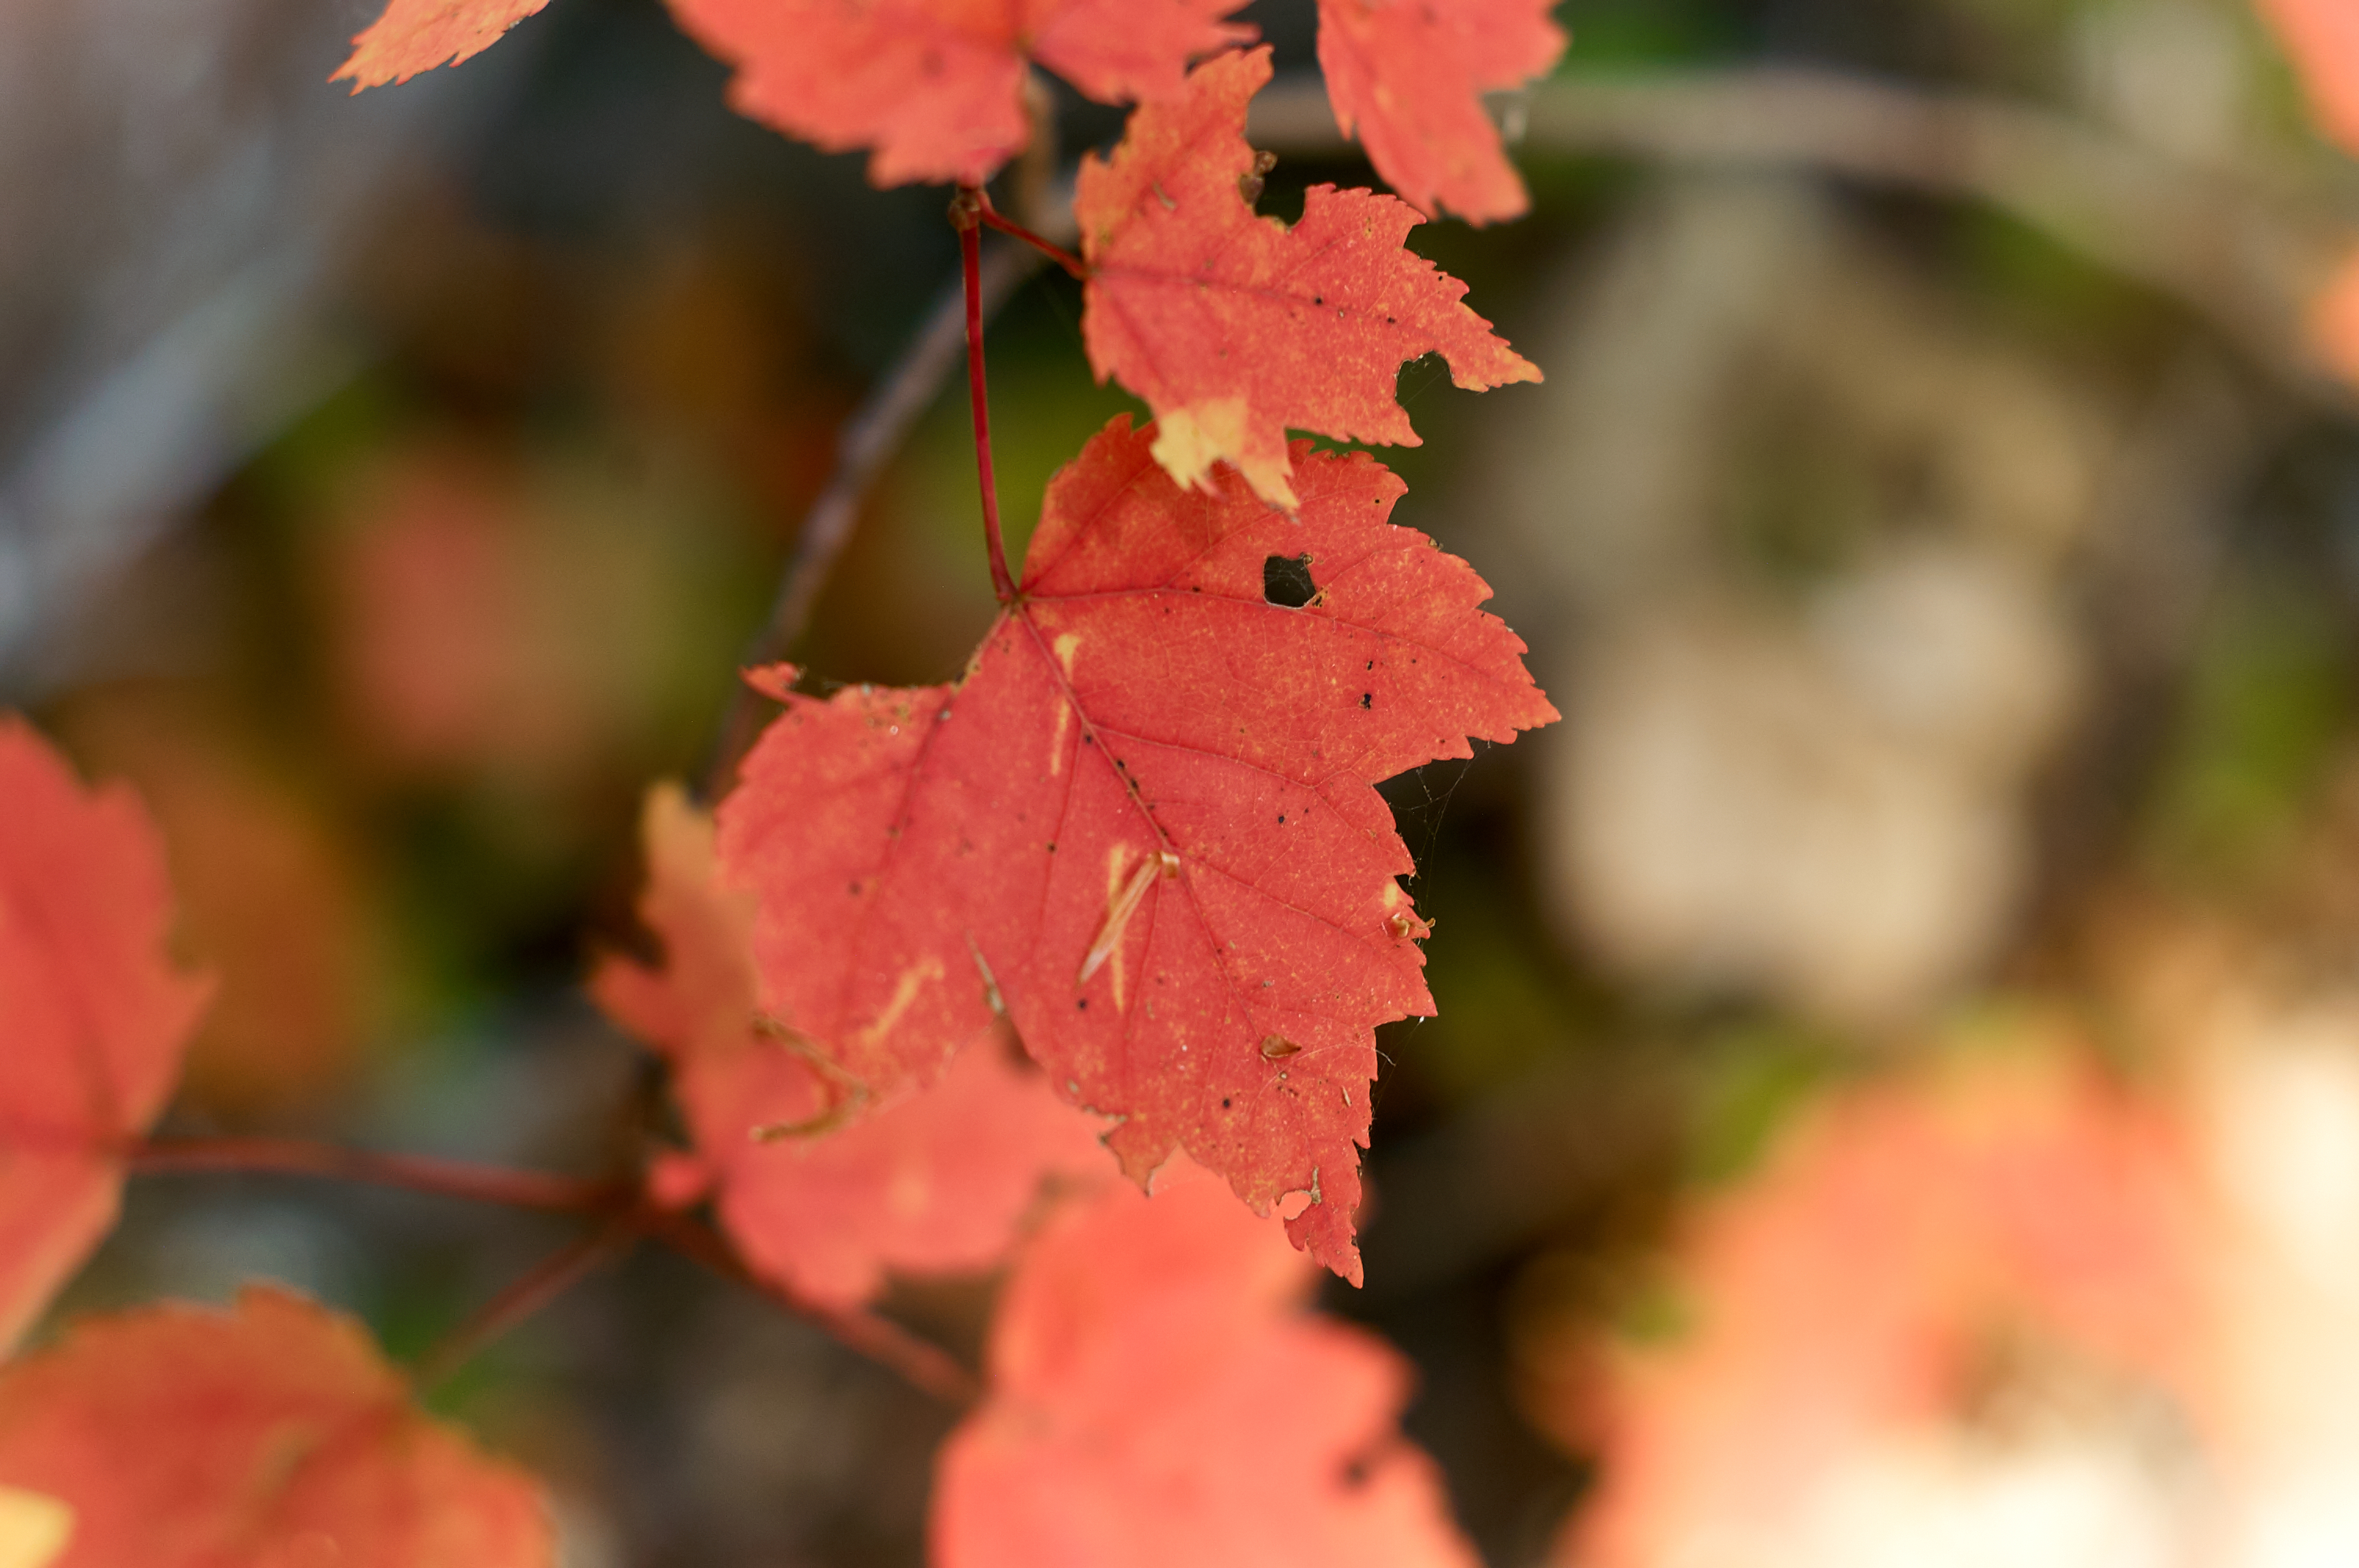 Red Maple Leaf Picture, Free Photograph